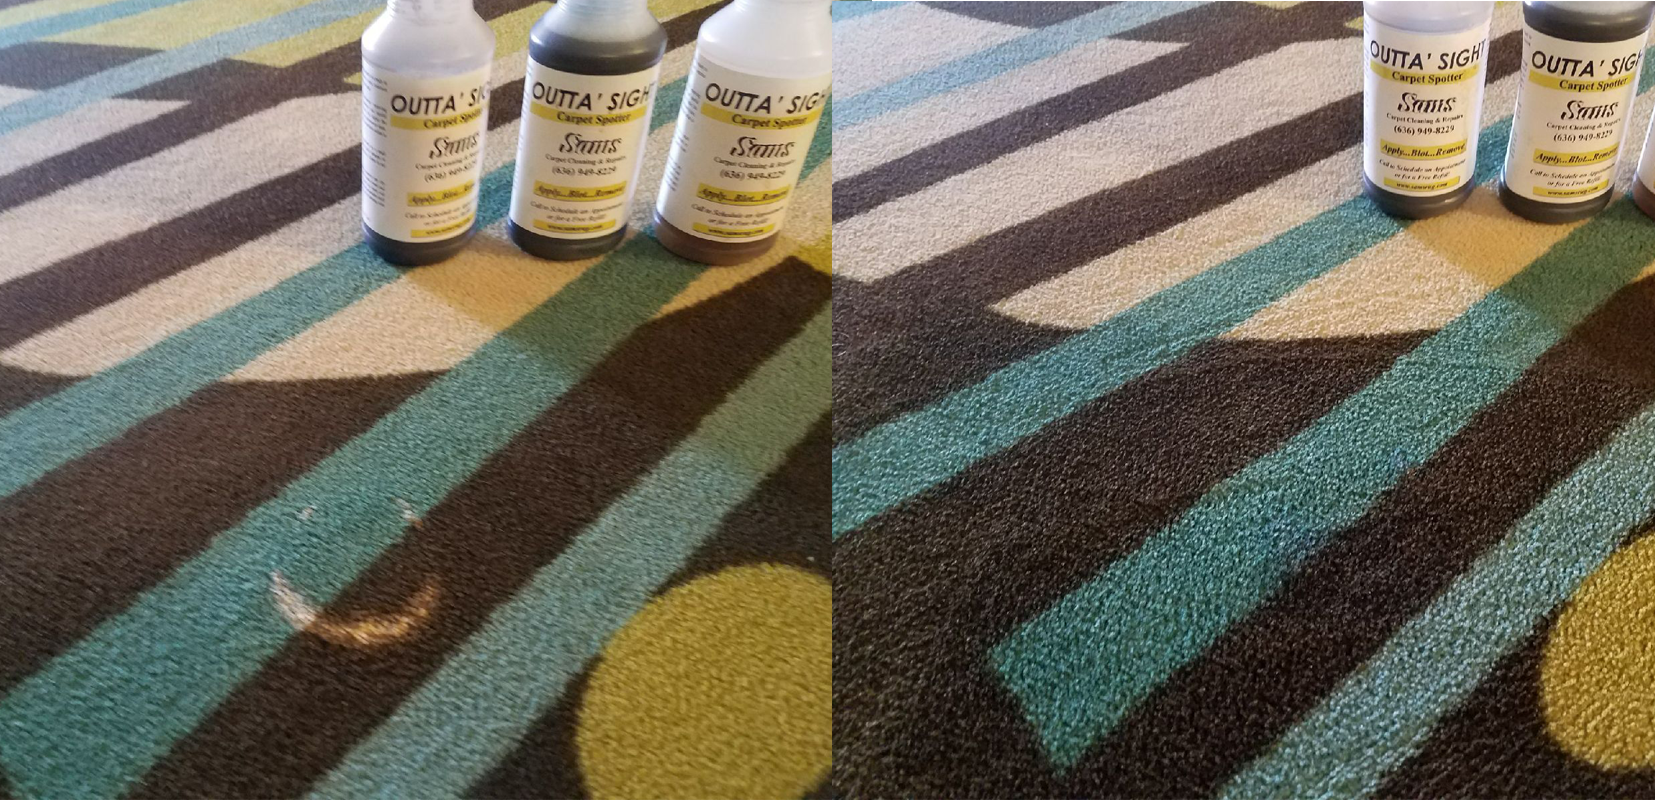 How We Get Bleach Stains Out Of Carpet Sams Cleaning Repairs